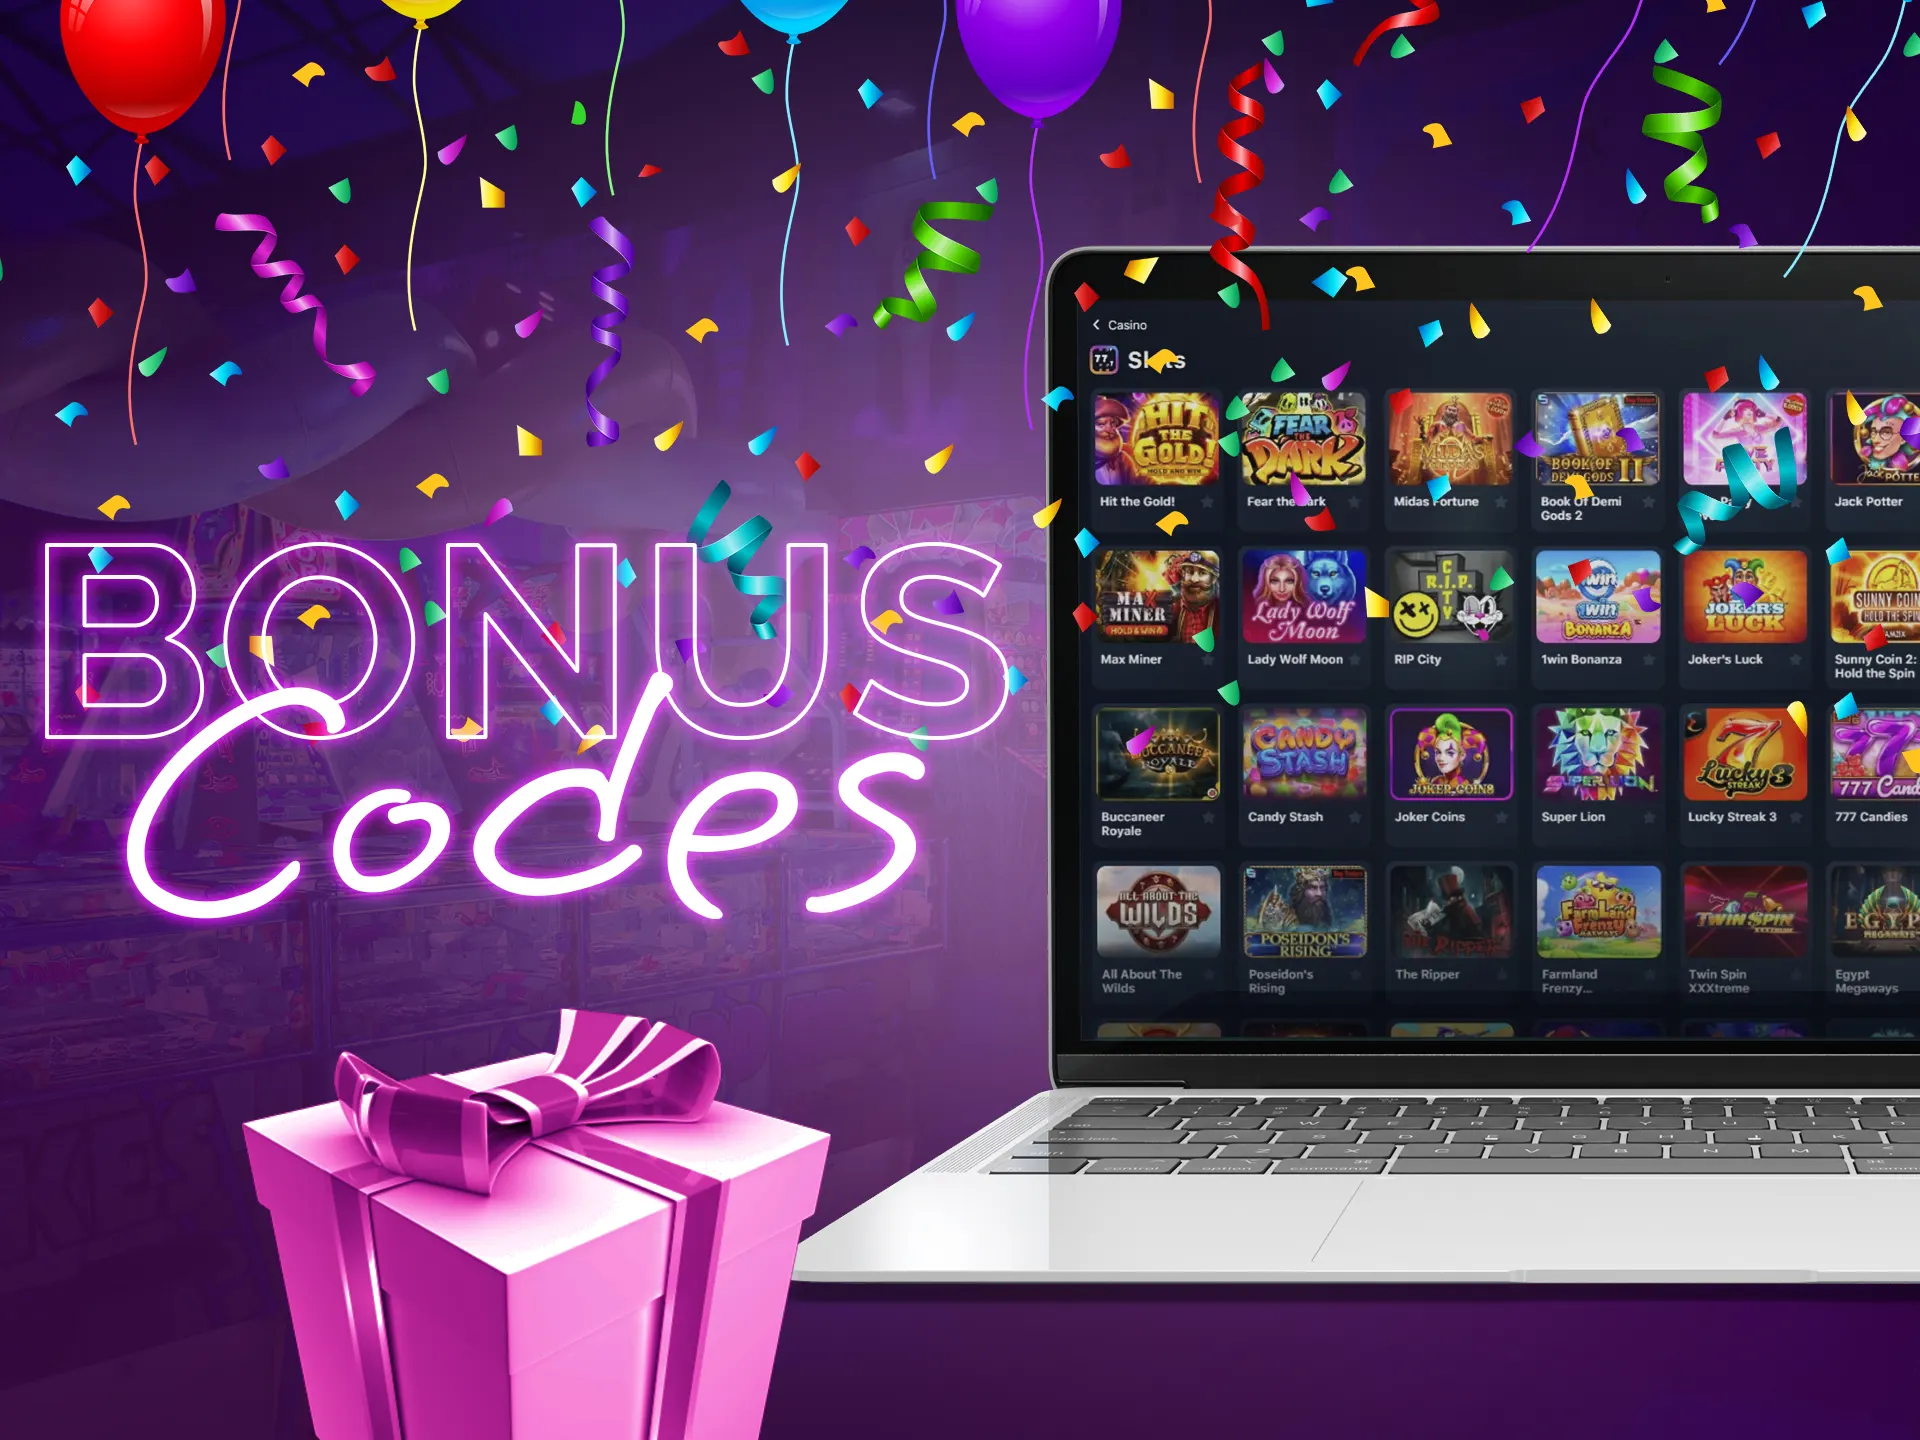 Use promo codes to get additional bonuses from a casino site.